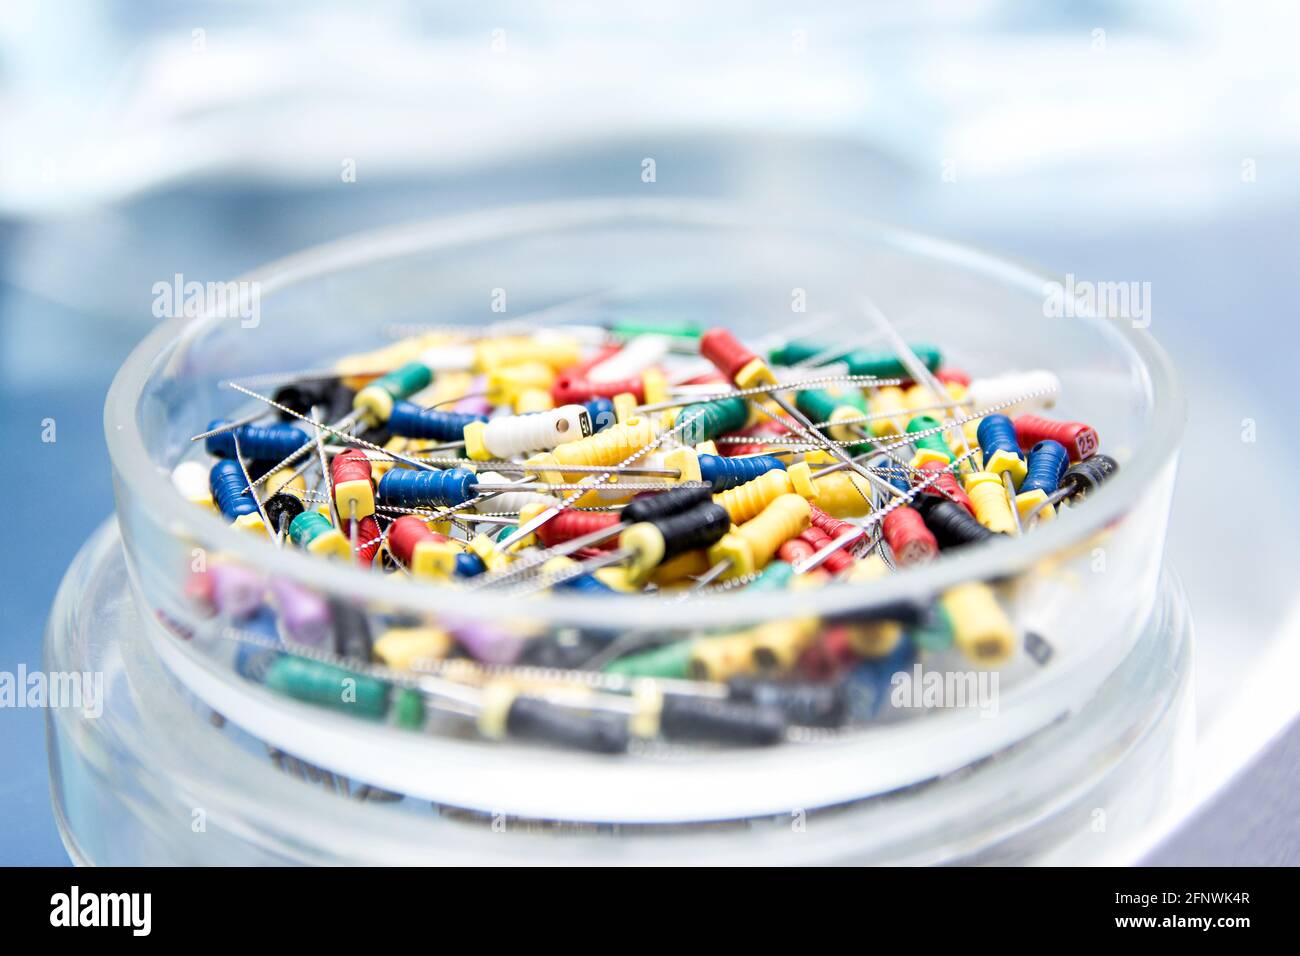 Dental tools in the glass round box. Dental instruments - k-files. Close-up dentist tools capture. Stock Photo